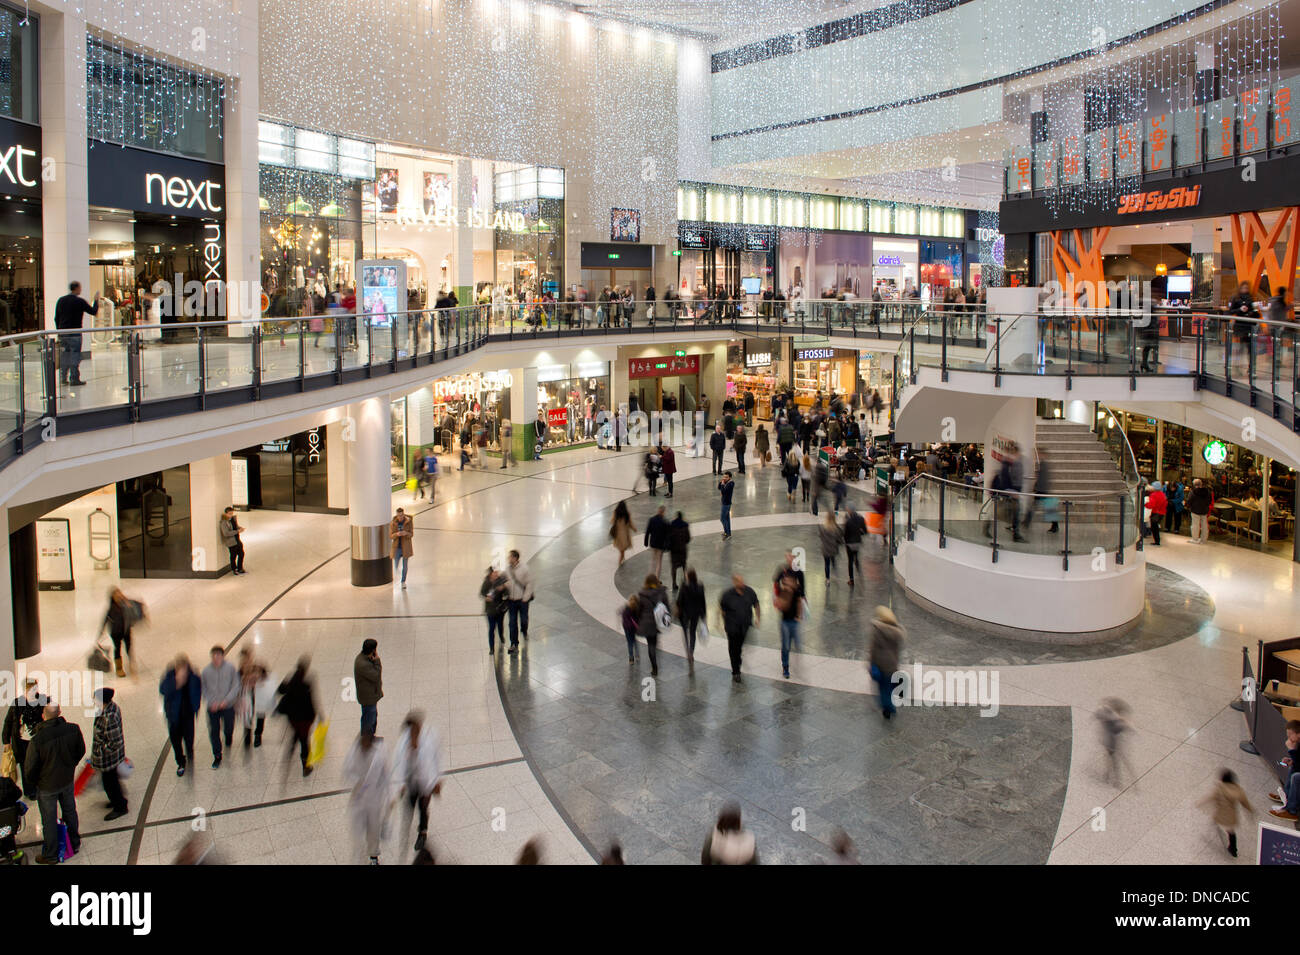 Manchester, UK. 22nd December, 2013. An internal shot of Manchester Arndale shopping centre during the Christmas lead up period. Over 210 stores are located within the bustling shopping complex. Credit:  Russell Hart/Alamy Live News Stock Photo